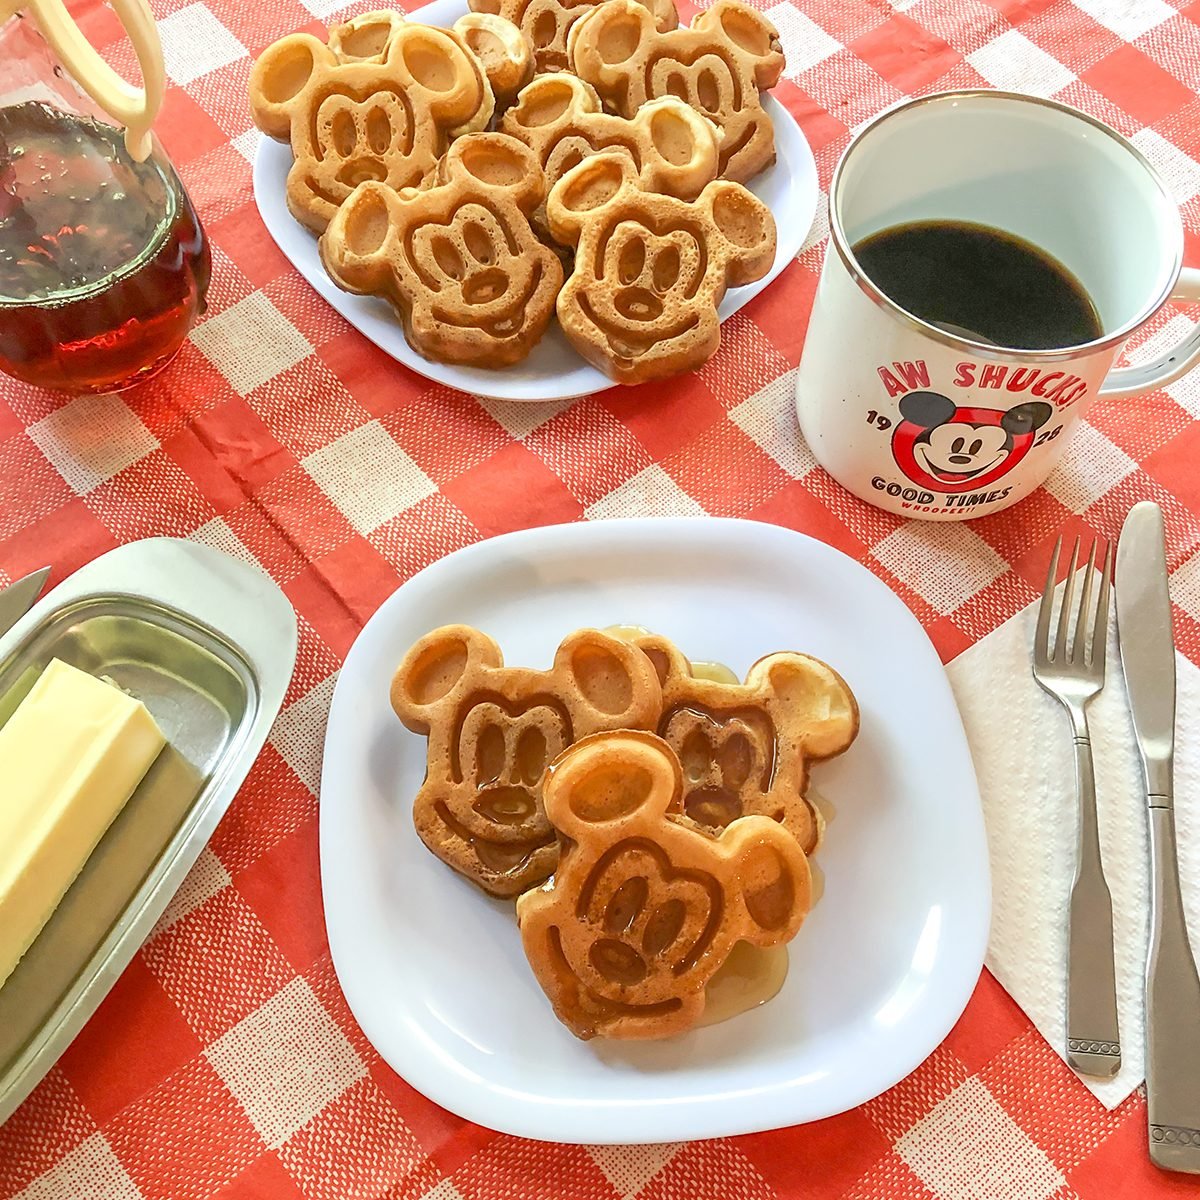  Disney Mickey and Minnie Mouse Measuring Cups - Adorable Love  Themed Mickey Mouse Measuring Cups for Kitchen: Home & Kitchen